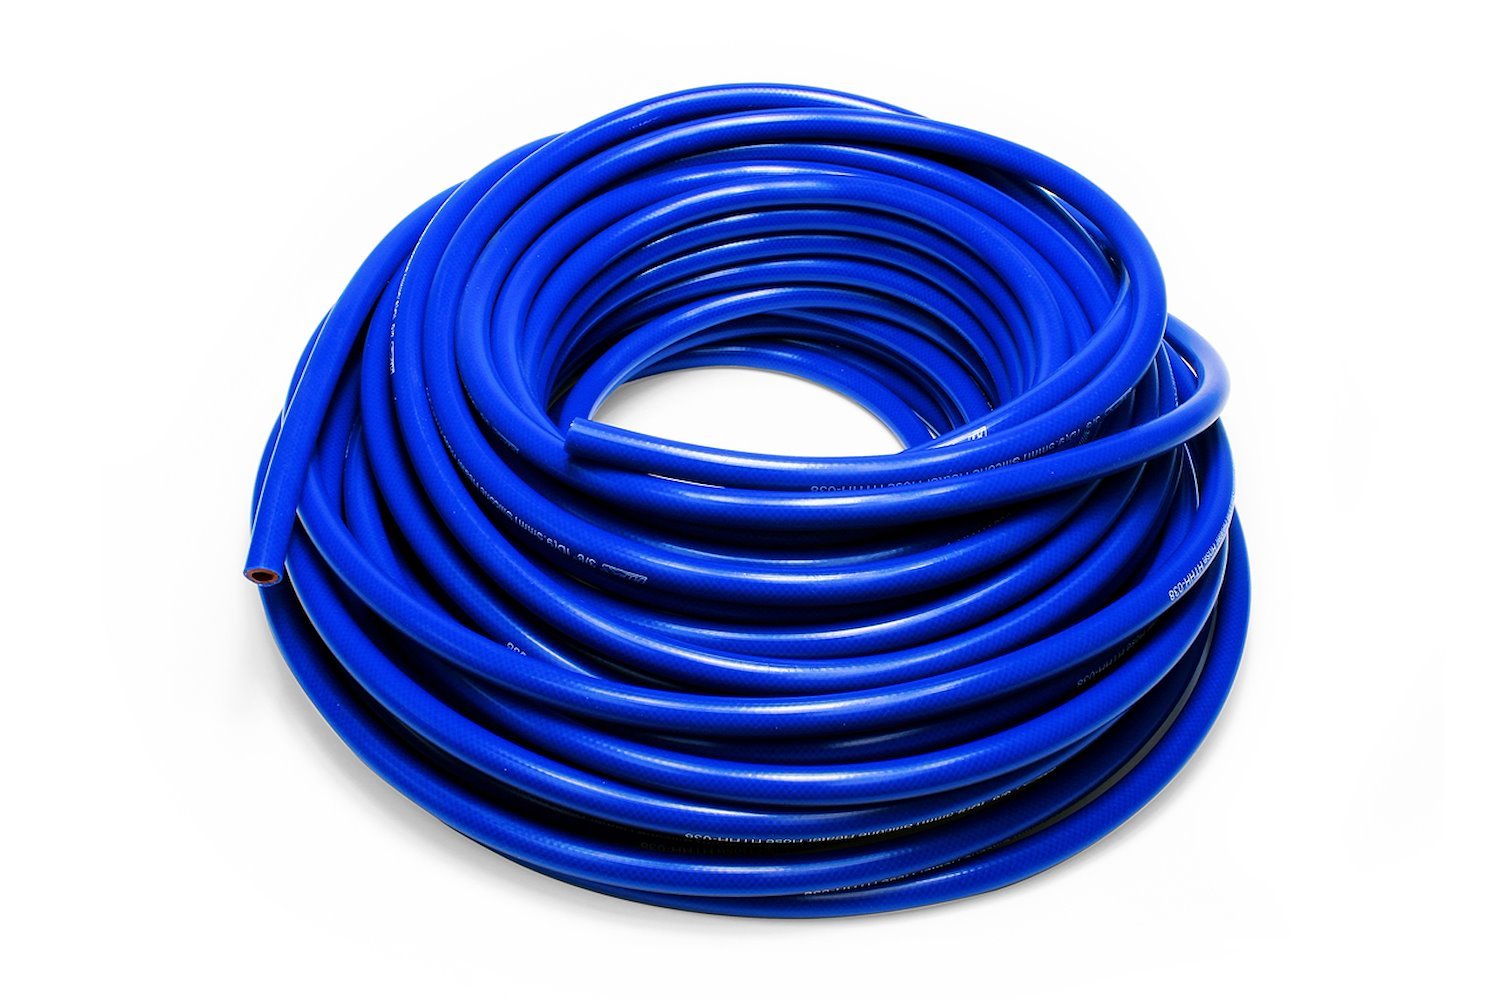 HTHH-025-BLUEx100 Silicone Heater Hose Tubing, High-Temp Reinforced, 1/4 in. ID, 100 ft. Roll, Blue